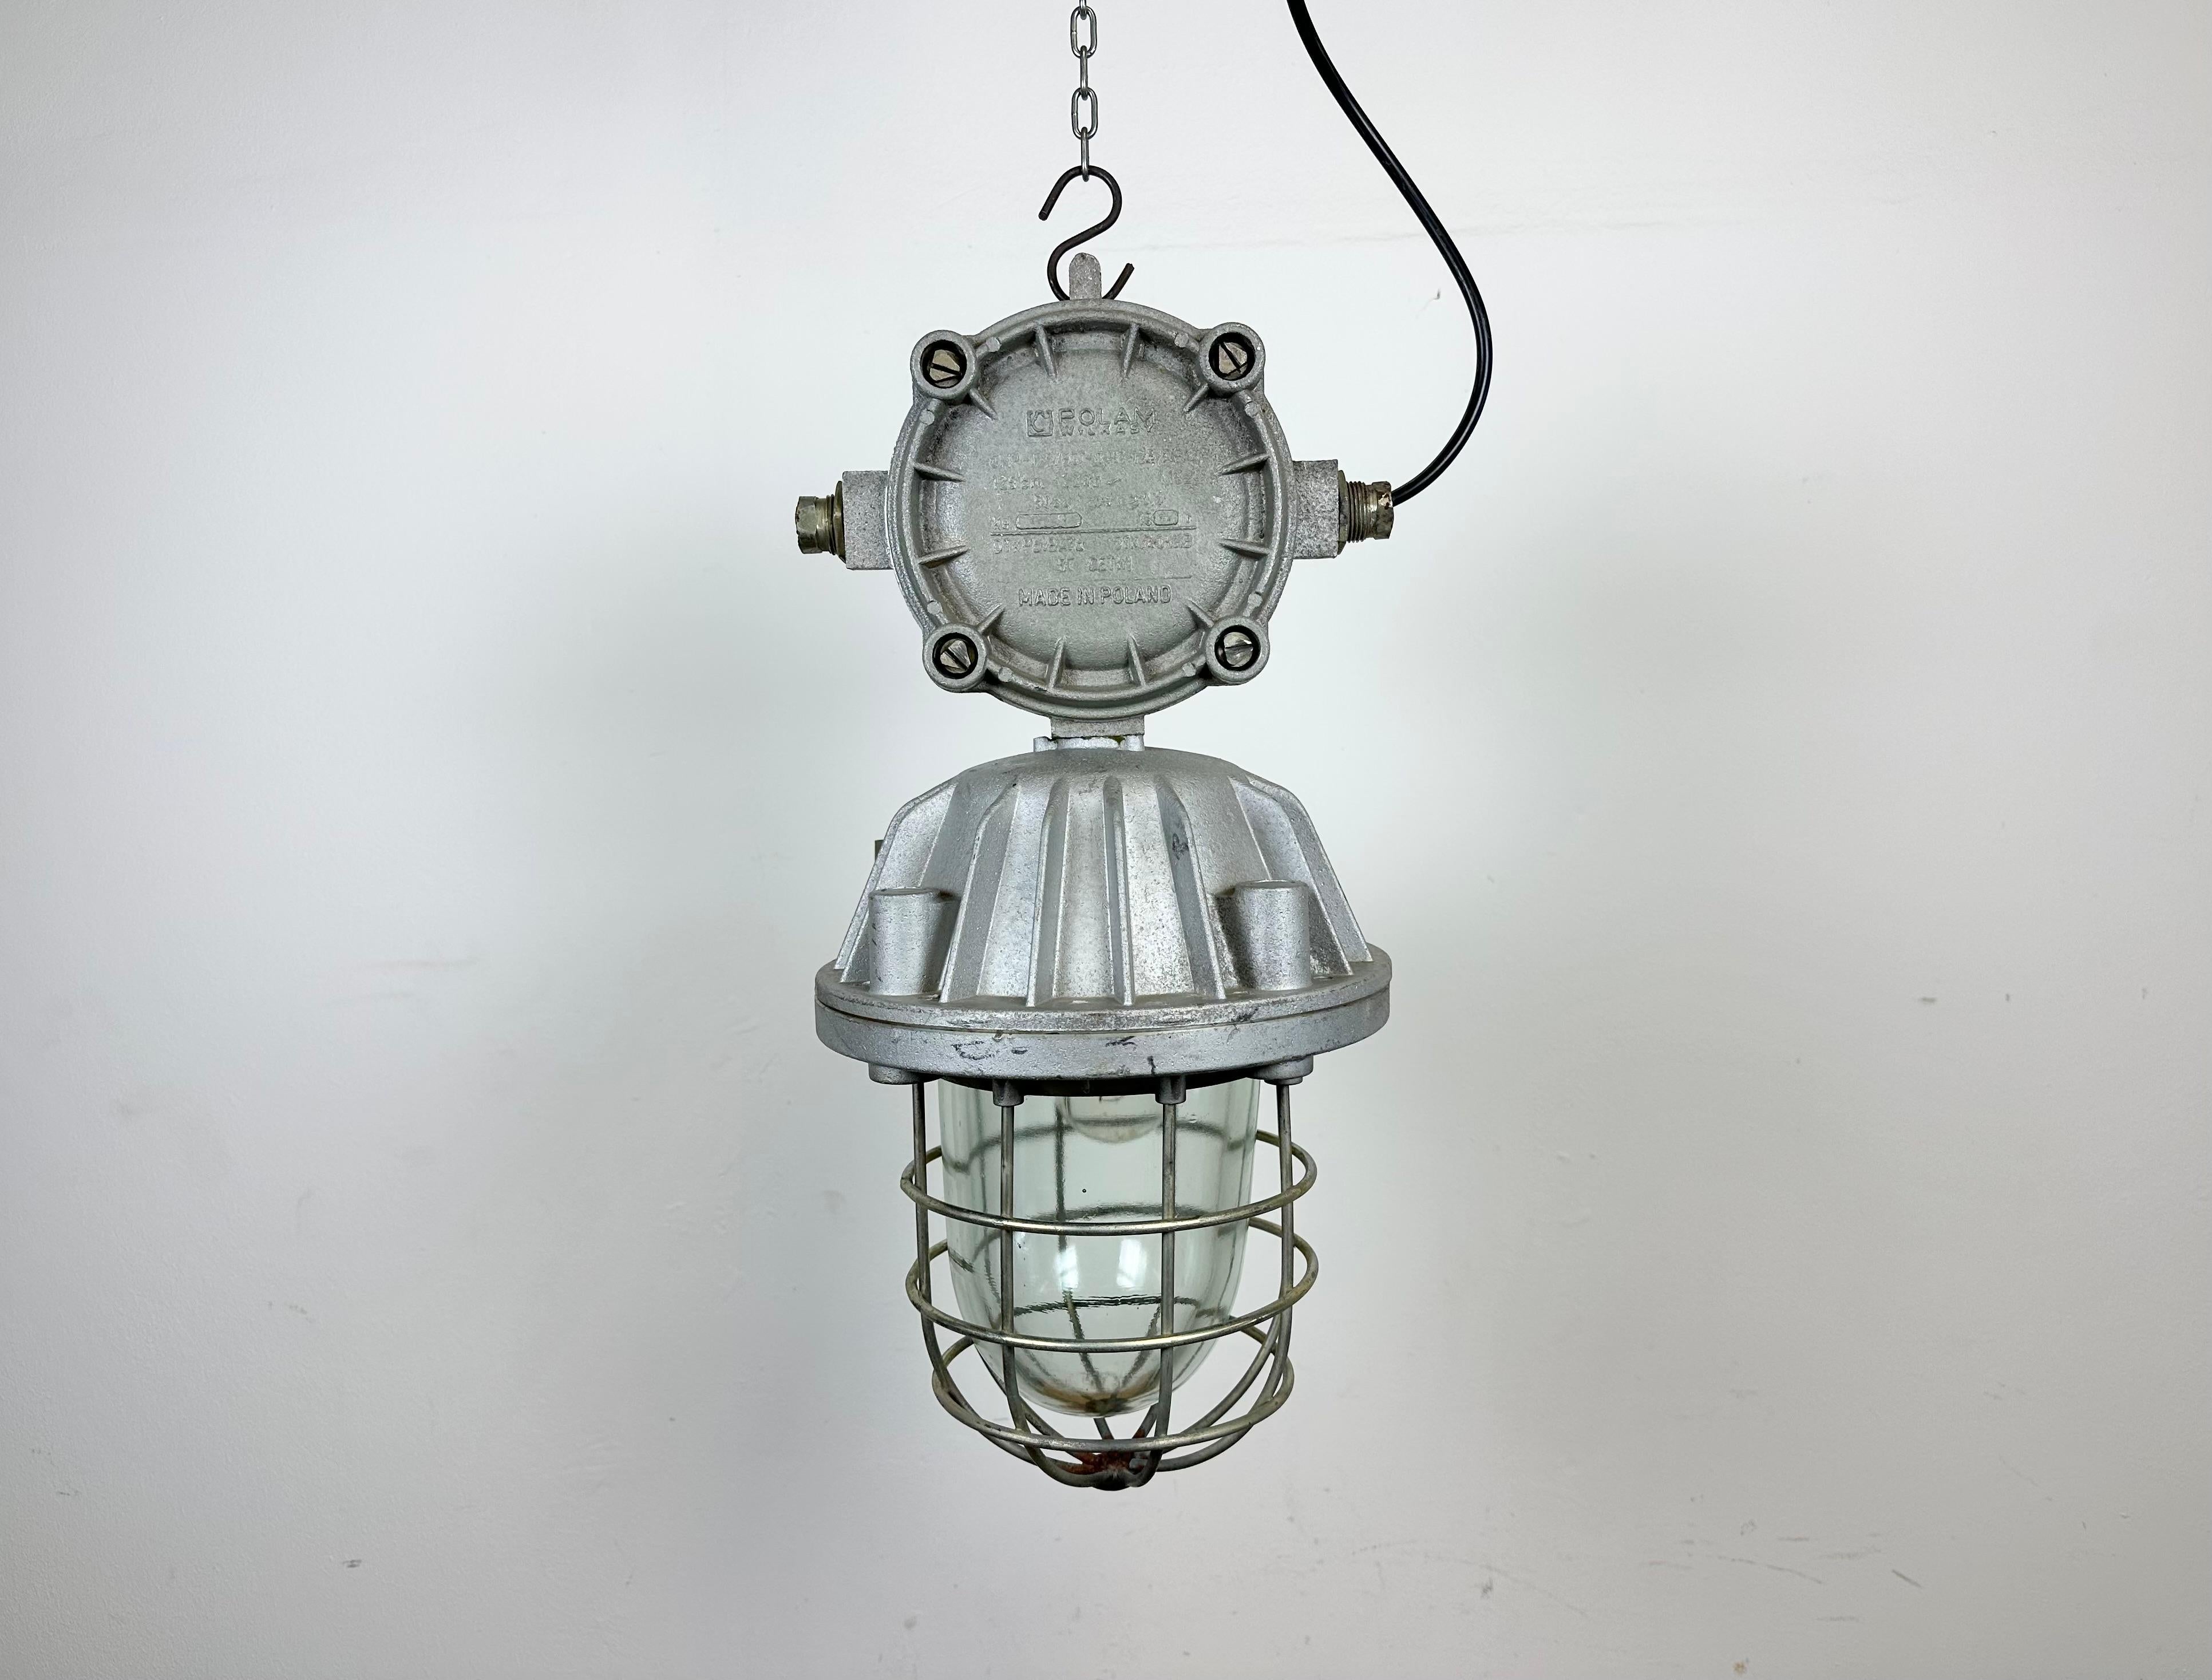 Large industrial factory hanging lamp made by Polam Wilkasy in Poland during the 1970s. It features a cast aluminium body, a clear glass cover and iron grid. The porcelain socket requires E 27/ E 26 lightbulbs. New wire. The weight of the lamp is 9